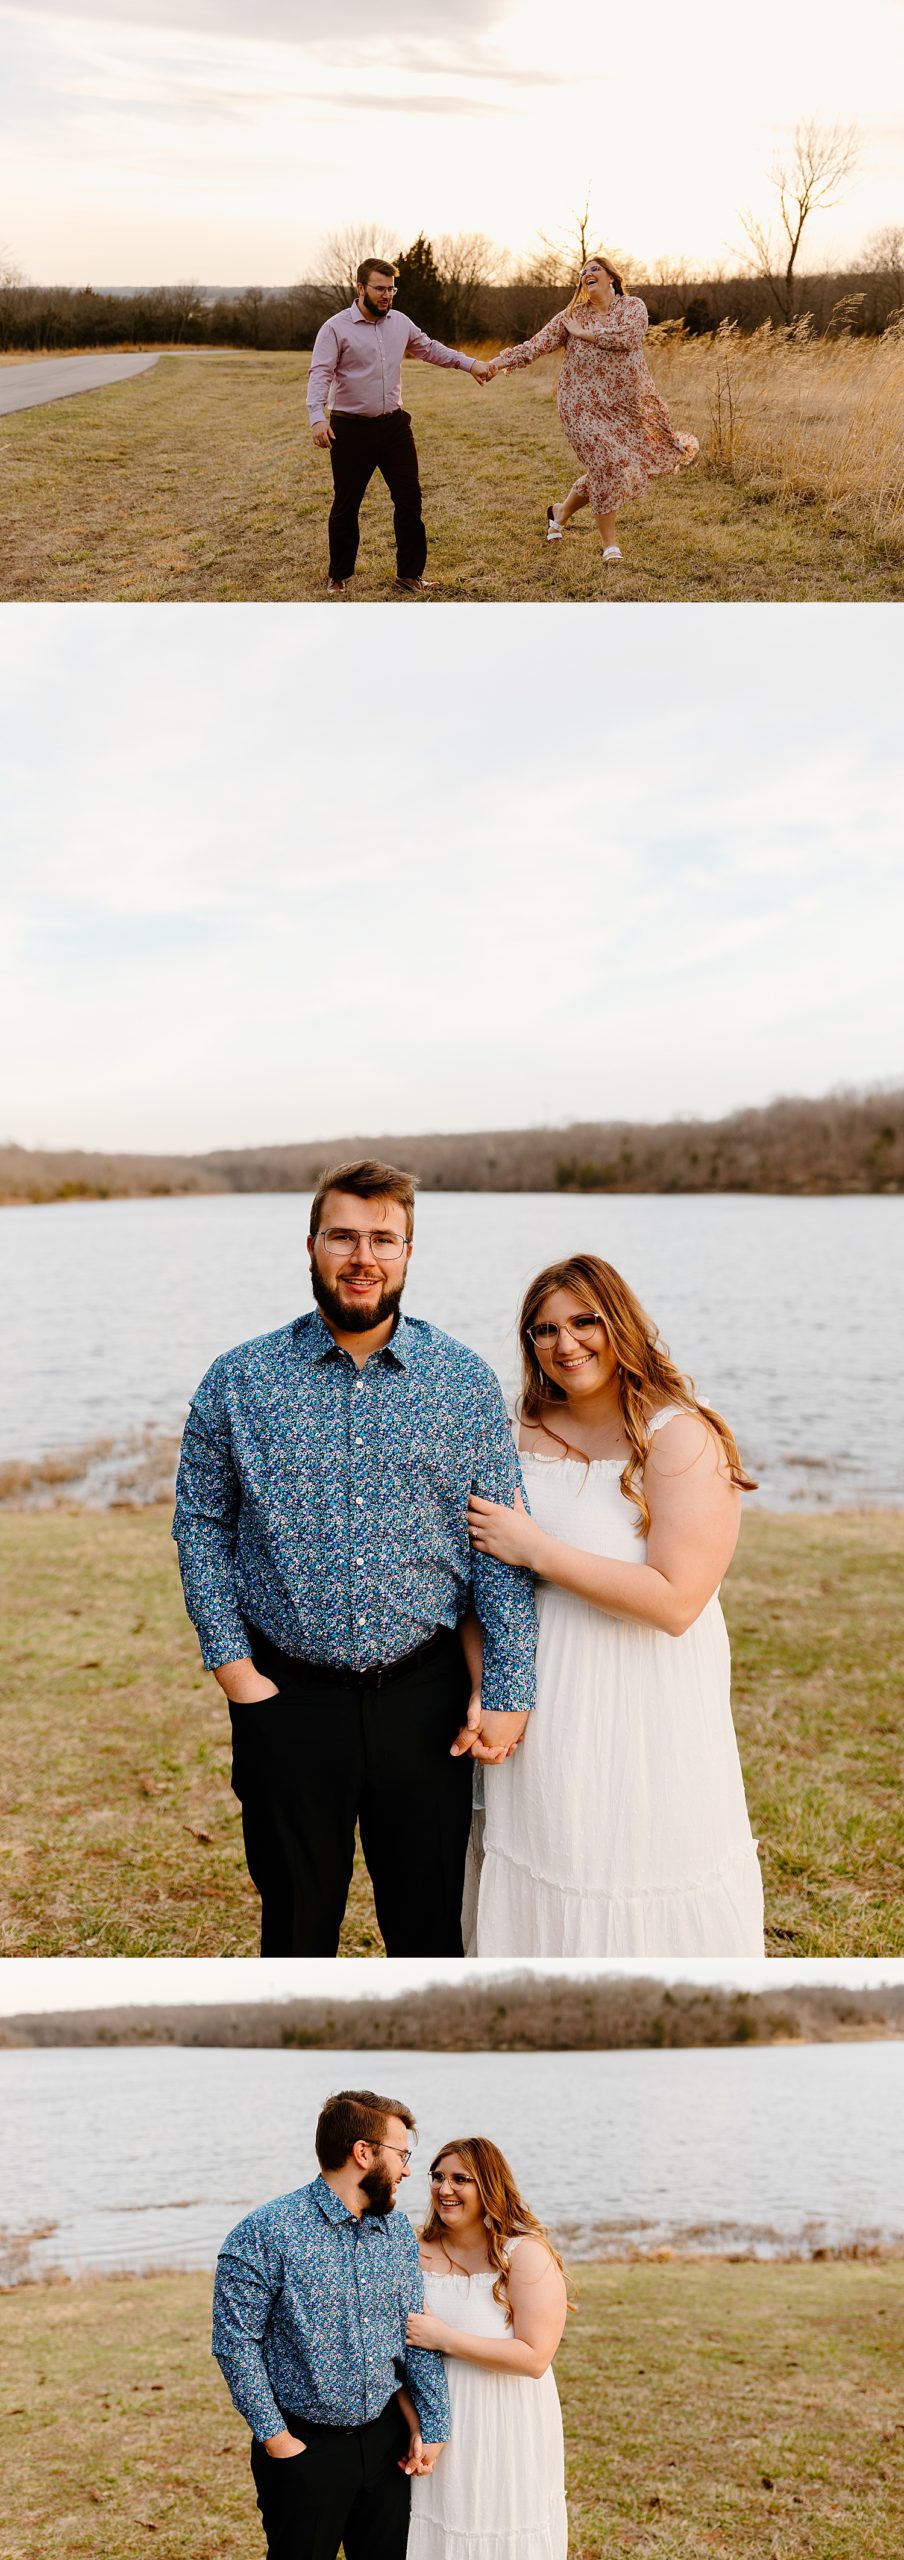 white long dress and floral shirt during engagement session at Kansas City park